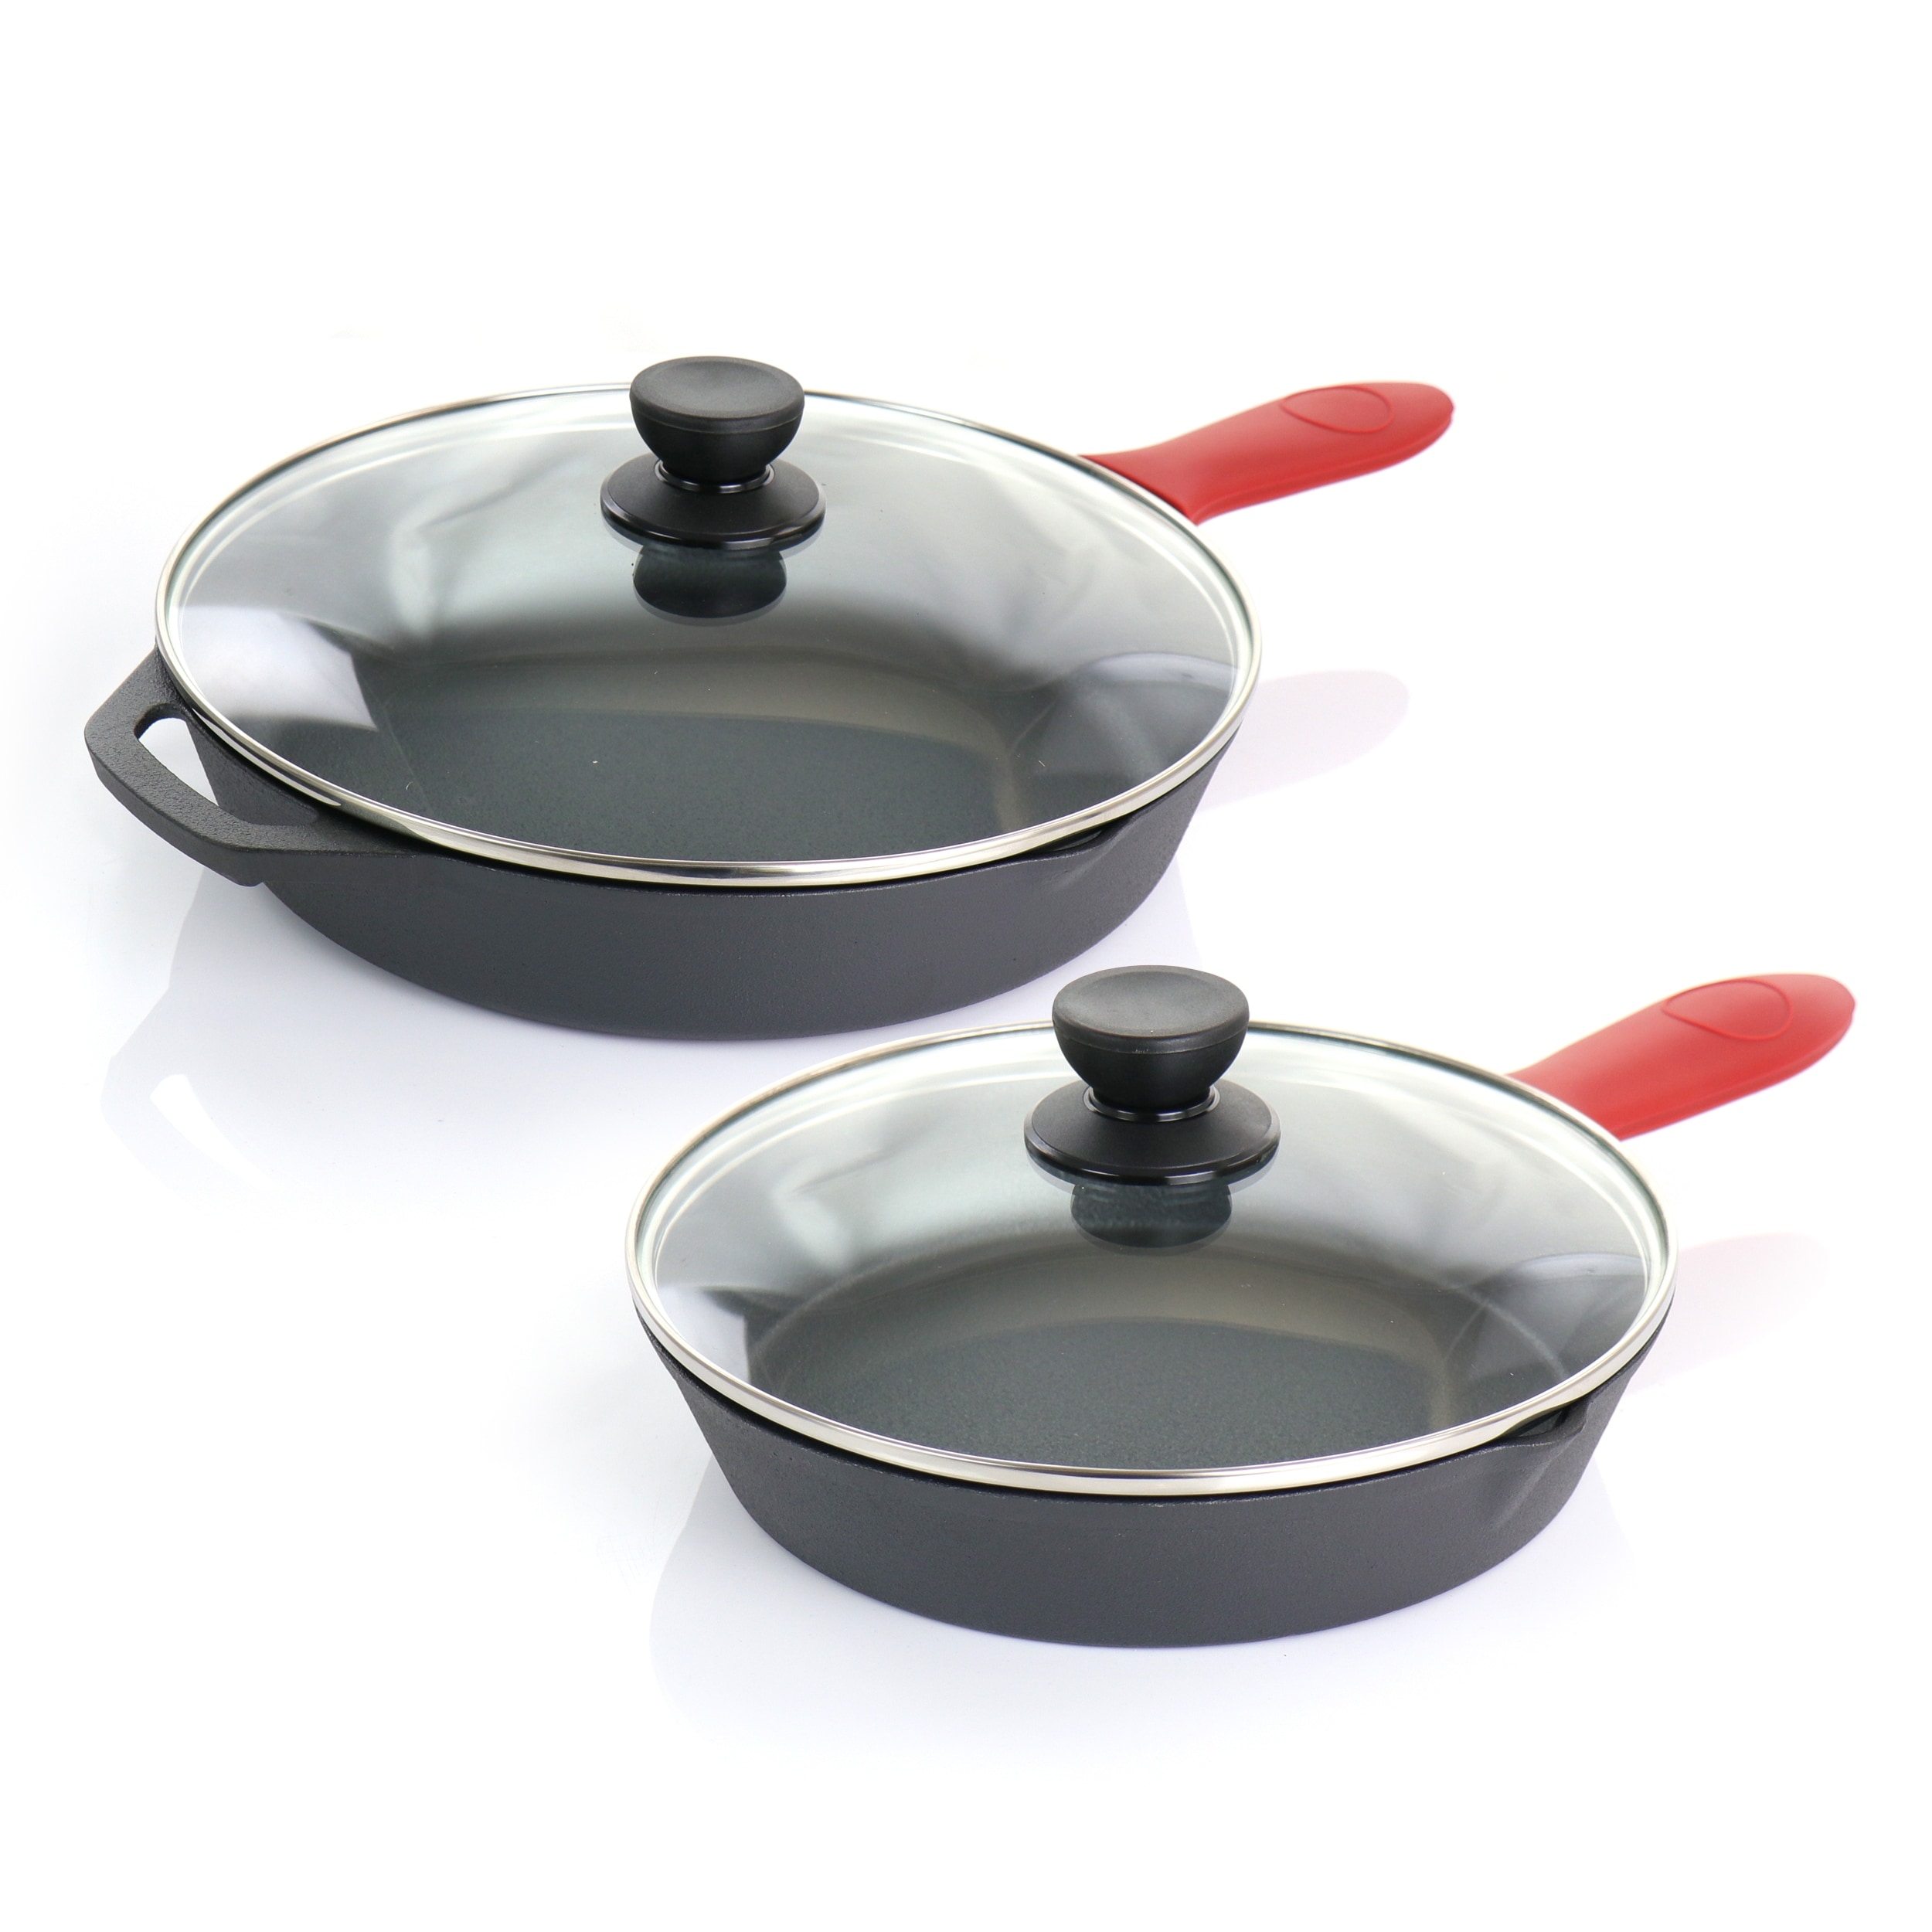 https://ak1.ostkcdn.com/images/products/is/images/direct/89a0d6182c6e45862fff8a2e8e91cfac57d726db/MegaChef-Pre-Seasoned-6Pc-Cast-Iron-Skillet-Set-w-Lids-and-Red-Holders.jpg